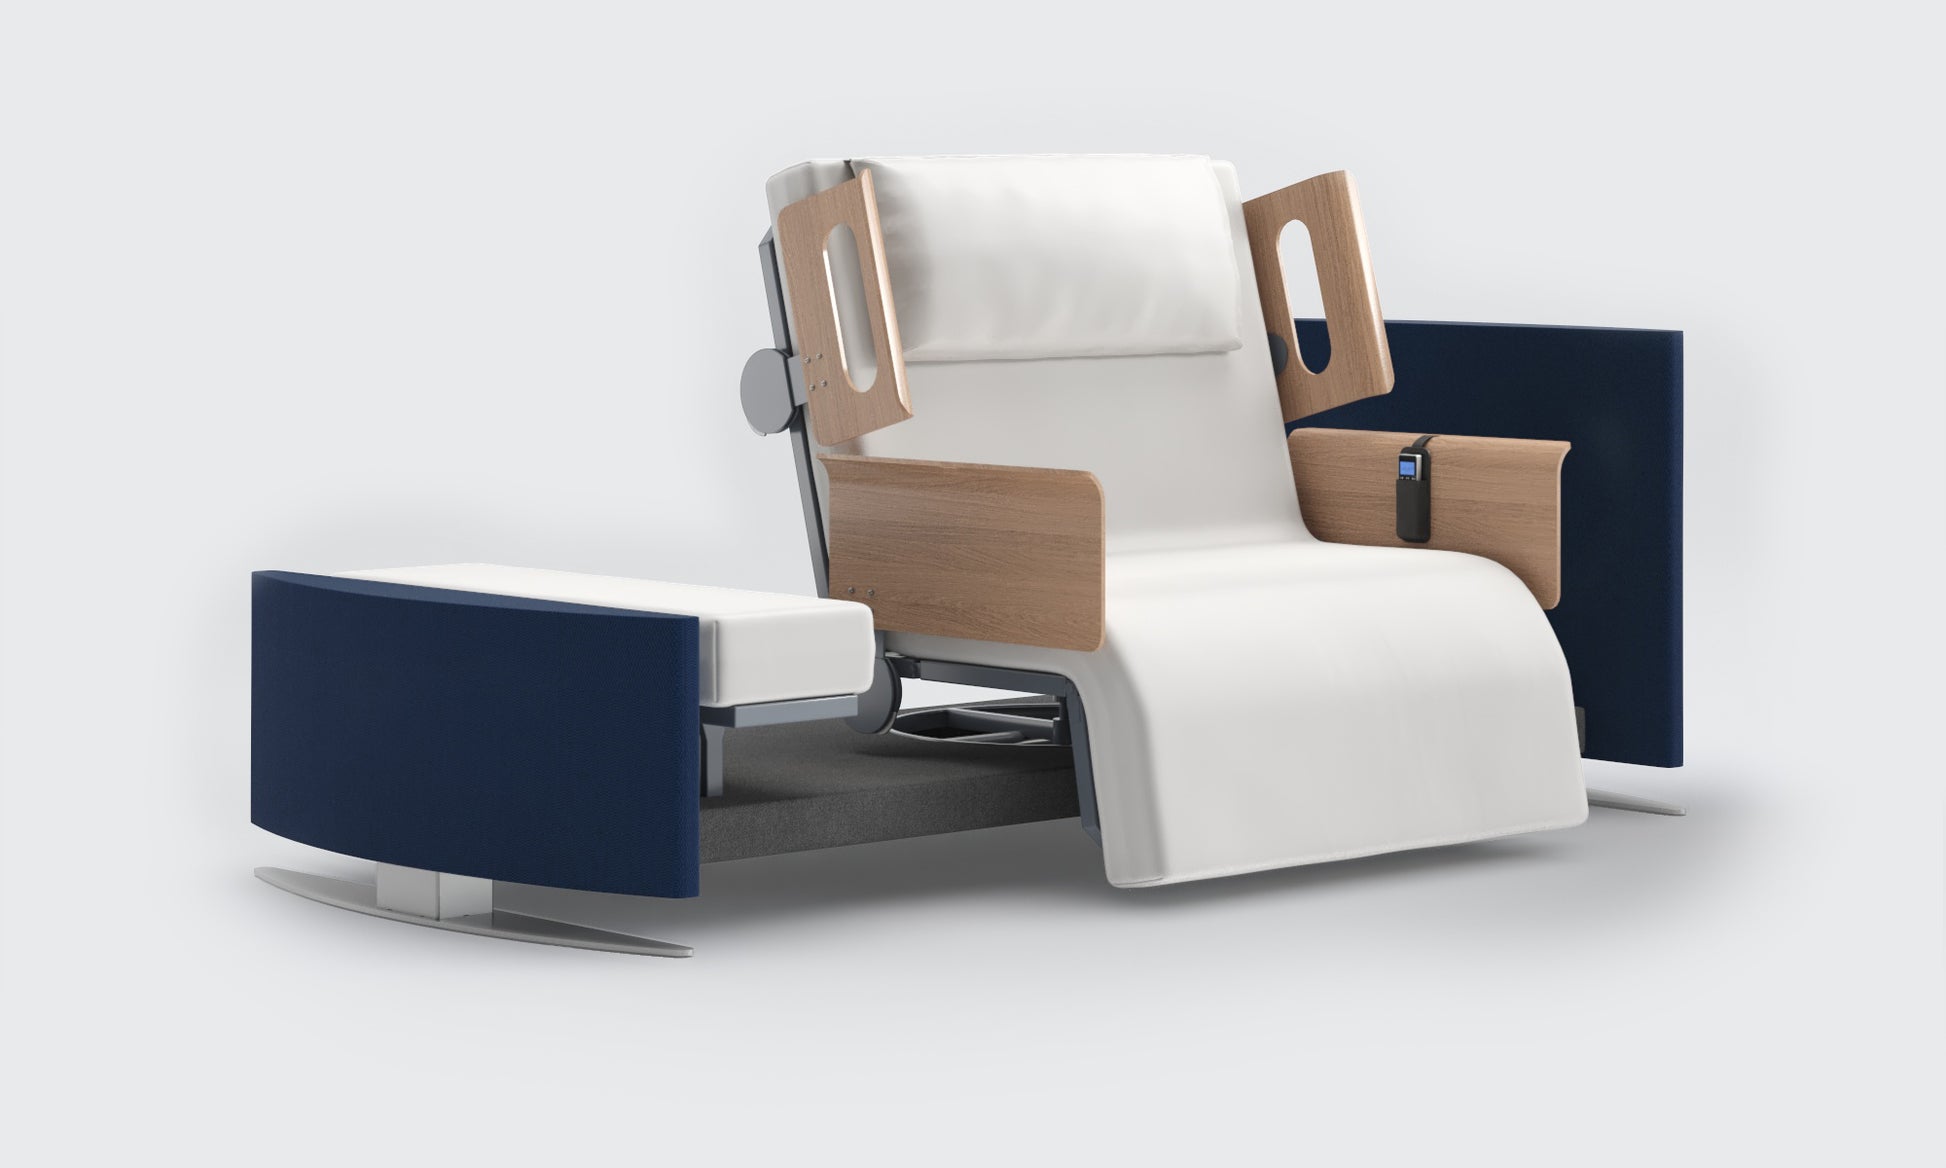 RotoBed® Change Rotating Chair Bed in petrol